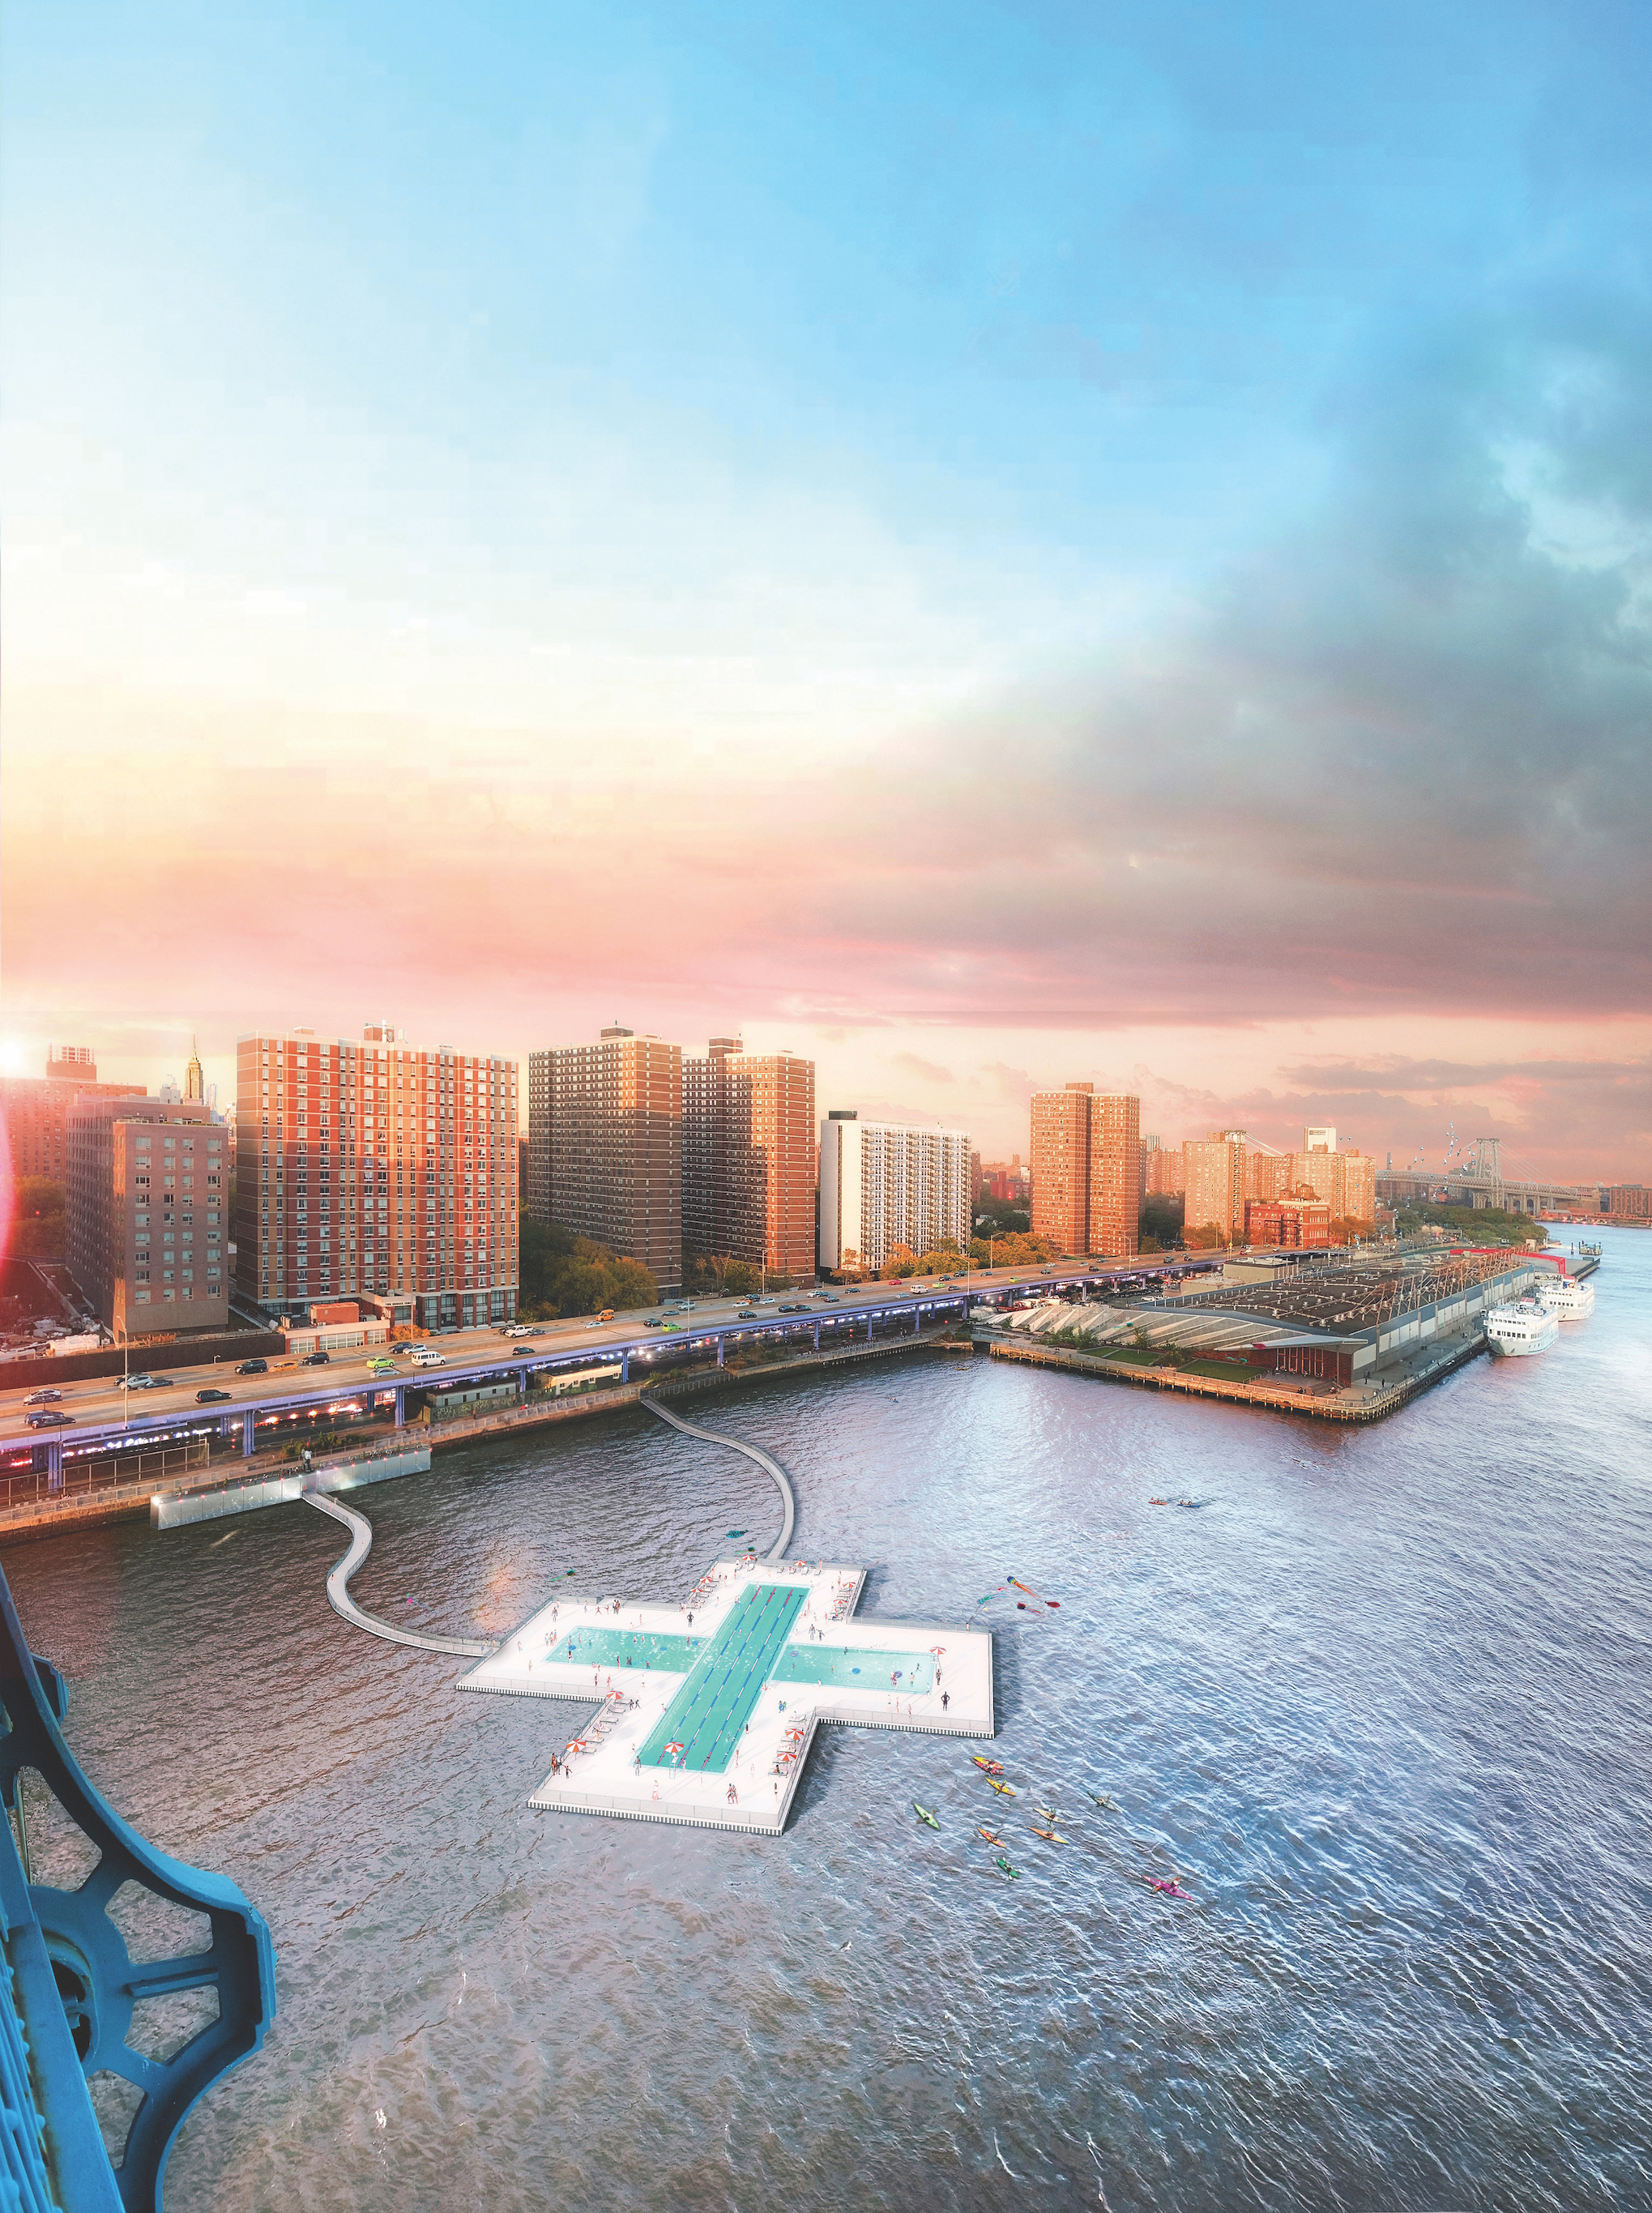 Aerial 2019 rendering of the Plus Pool off of Pier 35 at sunset